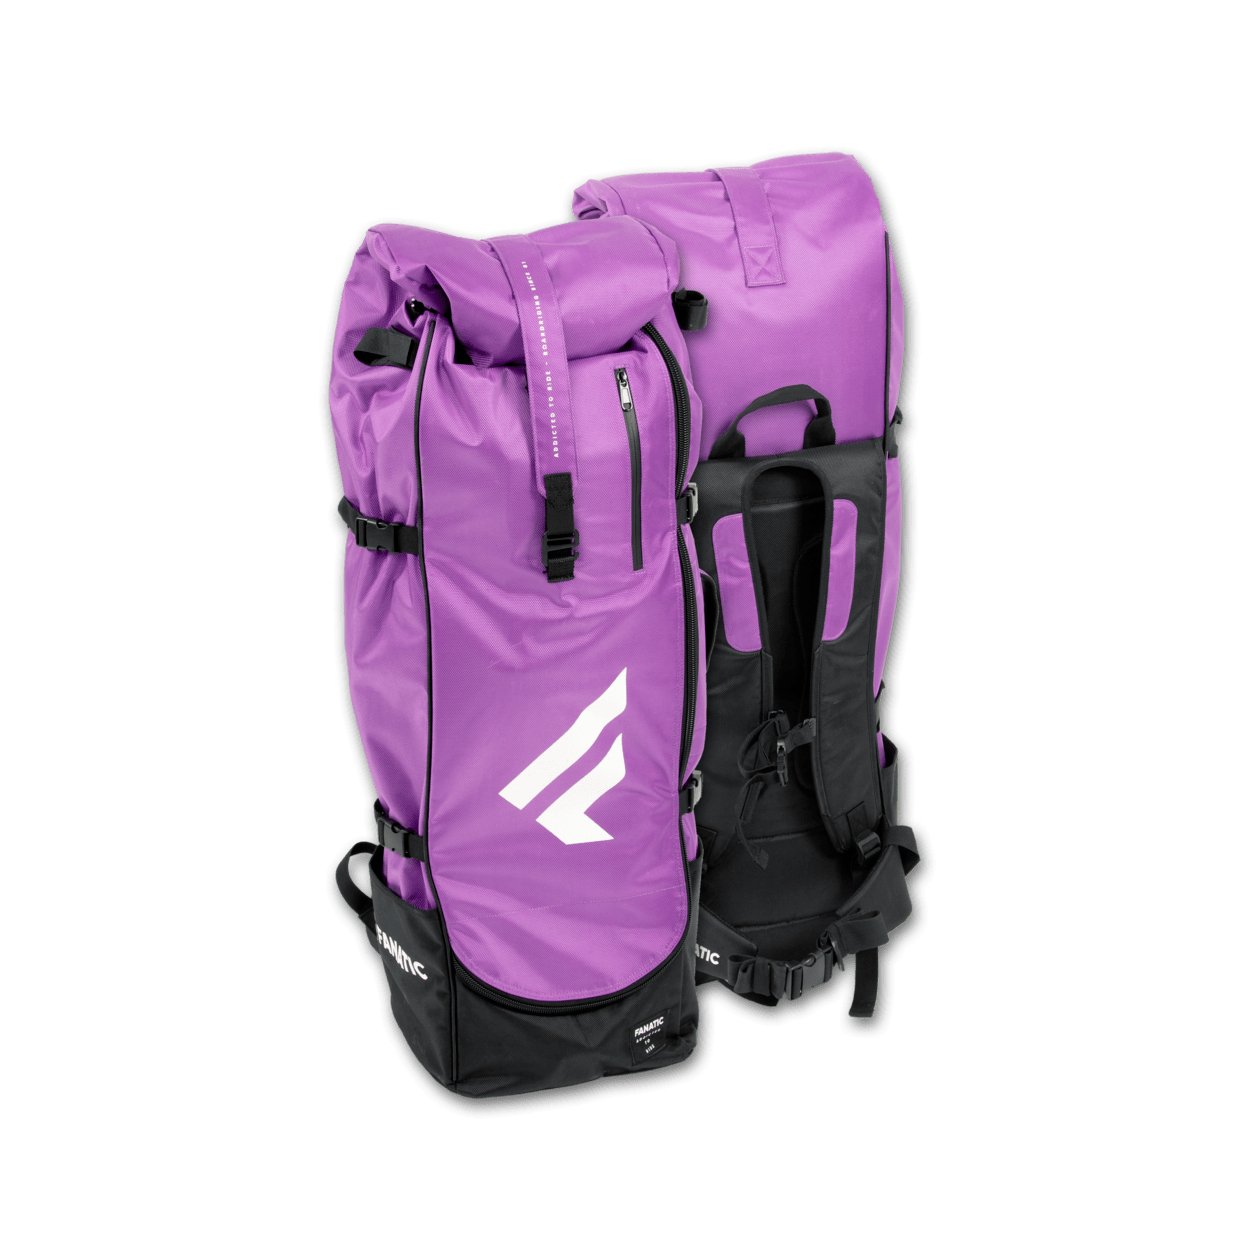 Fanatic Gearbag Pocket iSUP 2023 - Worthing Watersports - 9010583037929 - Spareparts - Fanatic SUP